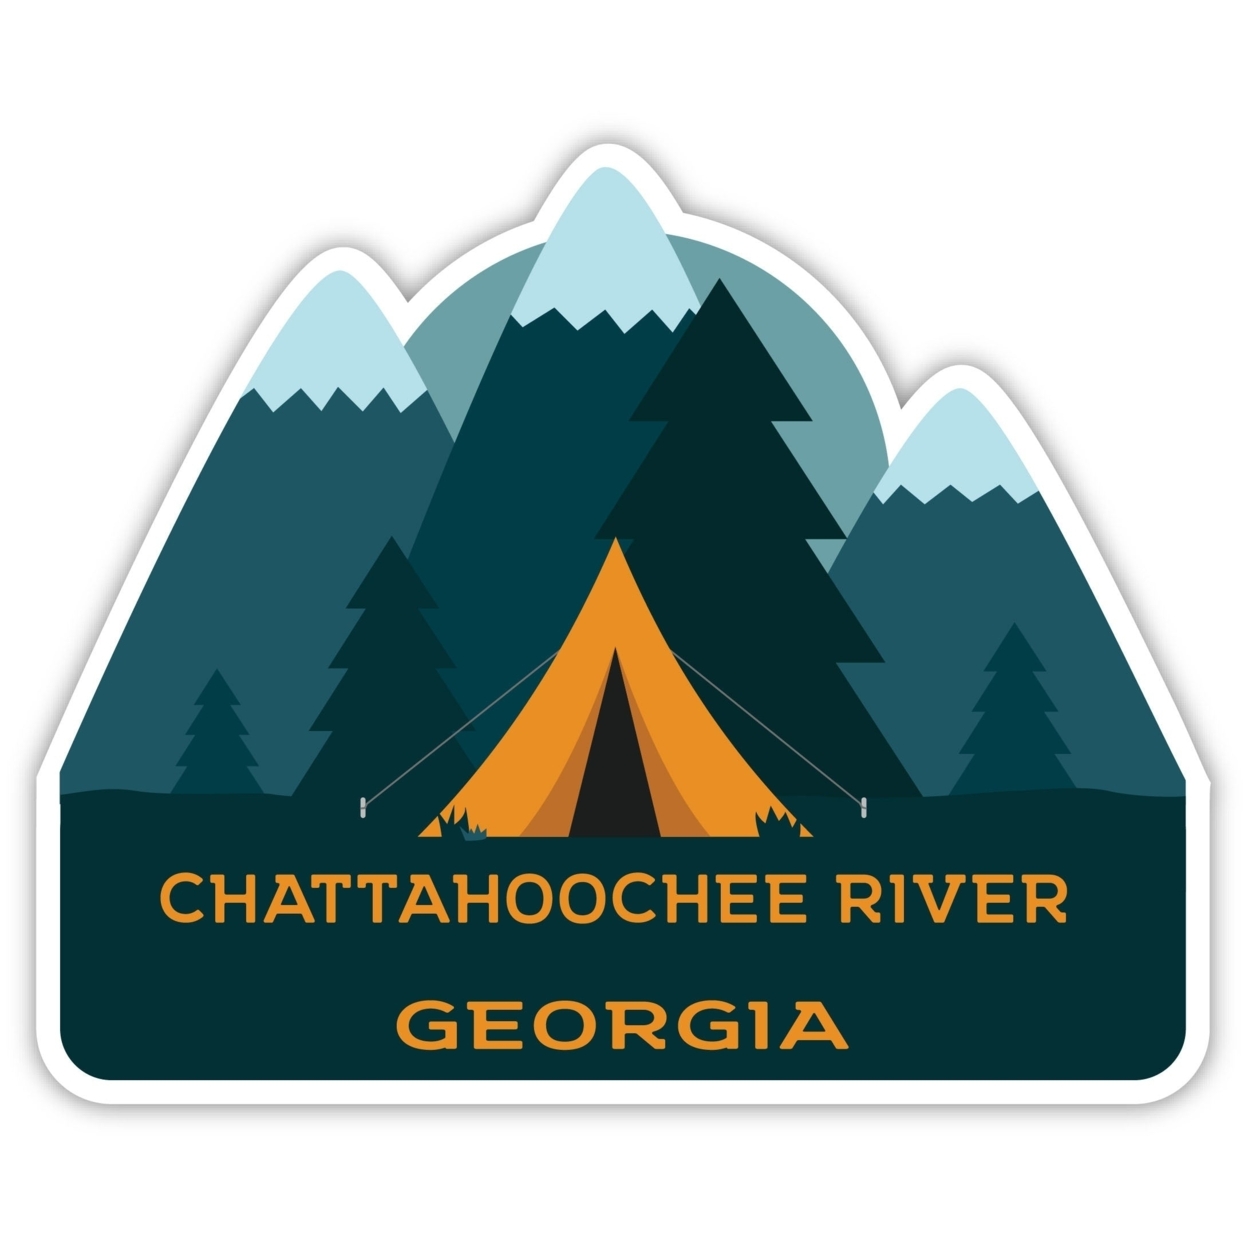 Chattahoochee River Georgia Souvenir Decorative Stickers (Choose Theme And Size) - 4-Pack, 12-Inch, Tent